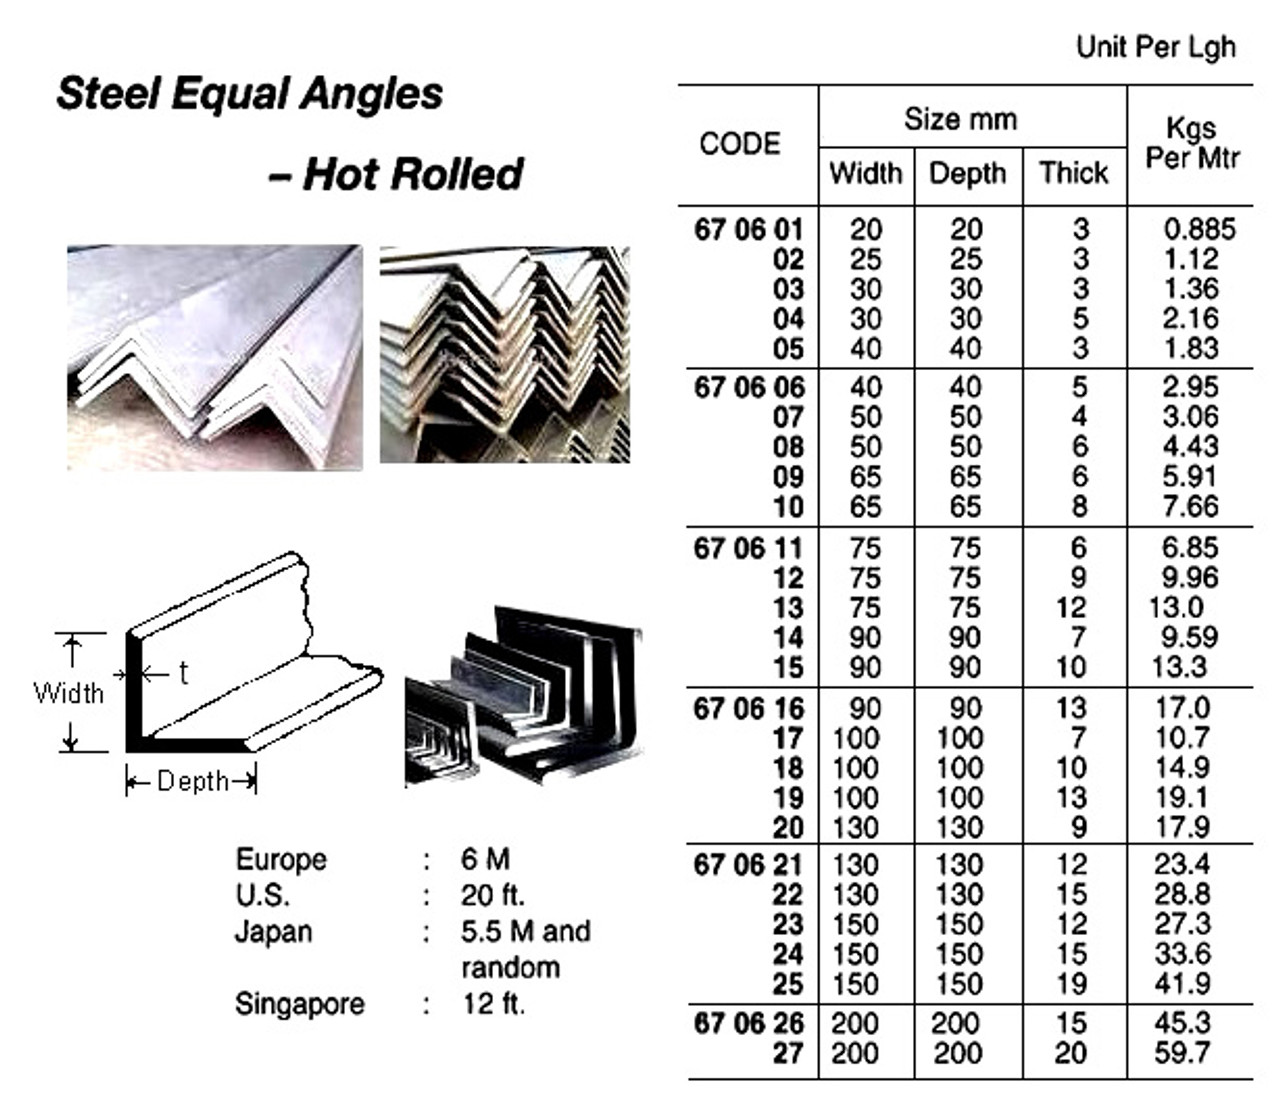 IMPA 670617 Steel equal angle hot rolled St37,0  100x100x8 mm